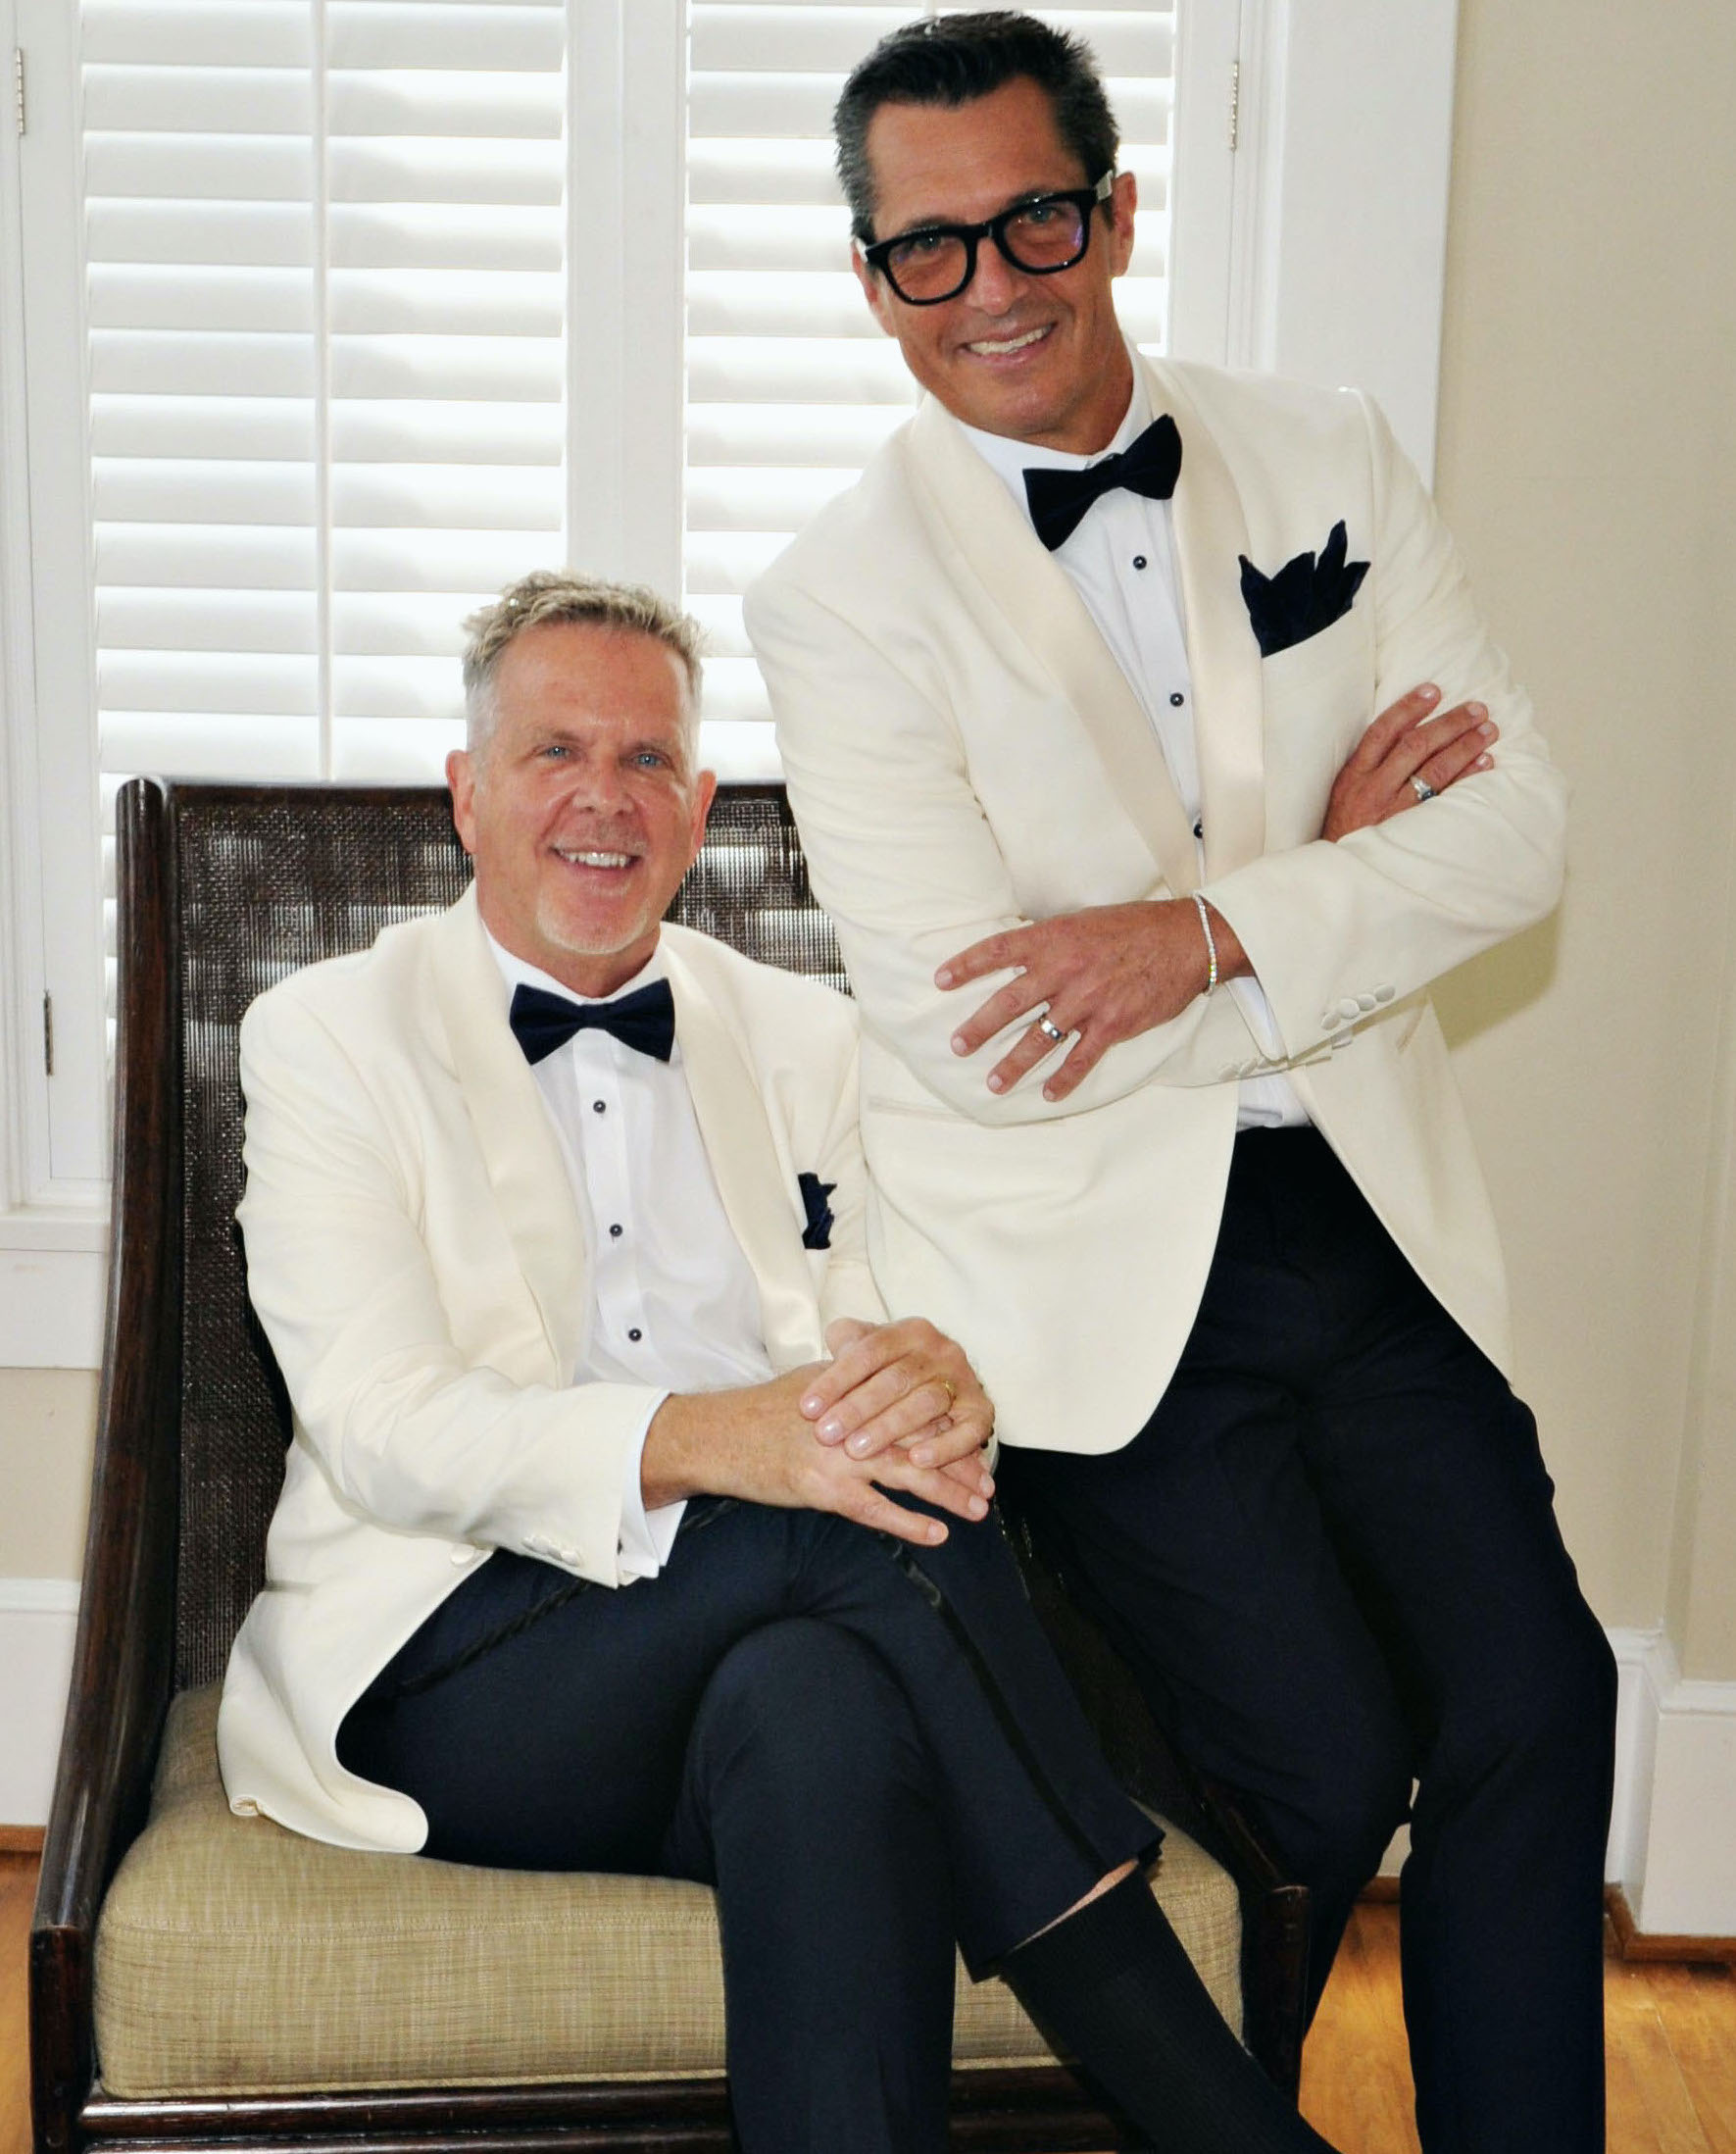 LBGT couple gets married at The Tremont House Hotel in Galveston, TX.